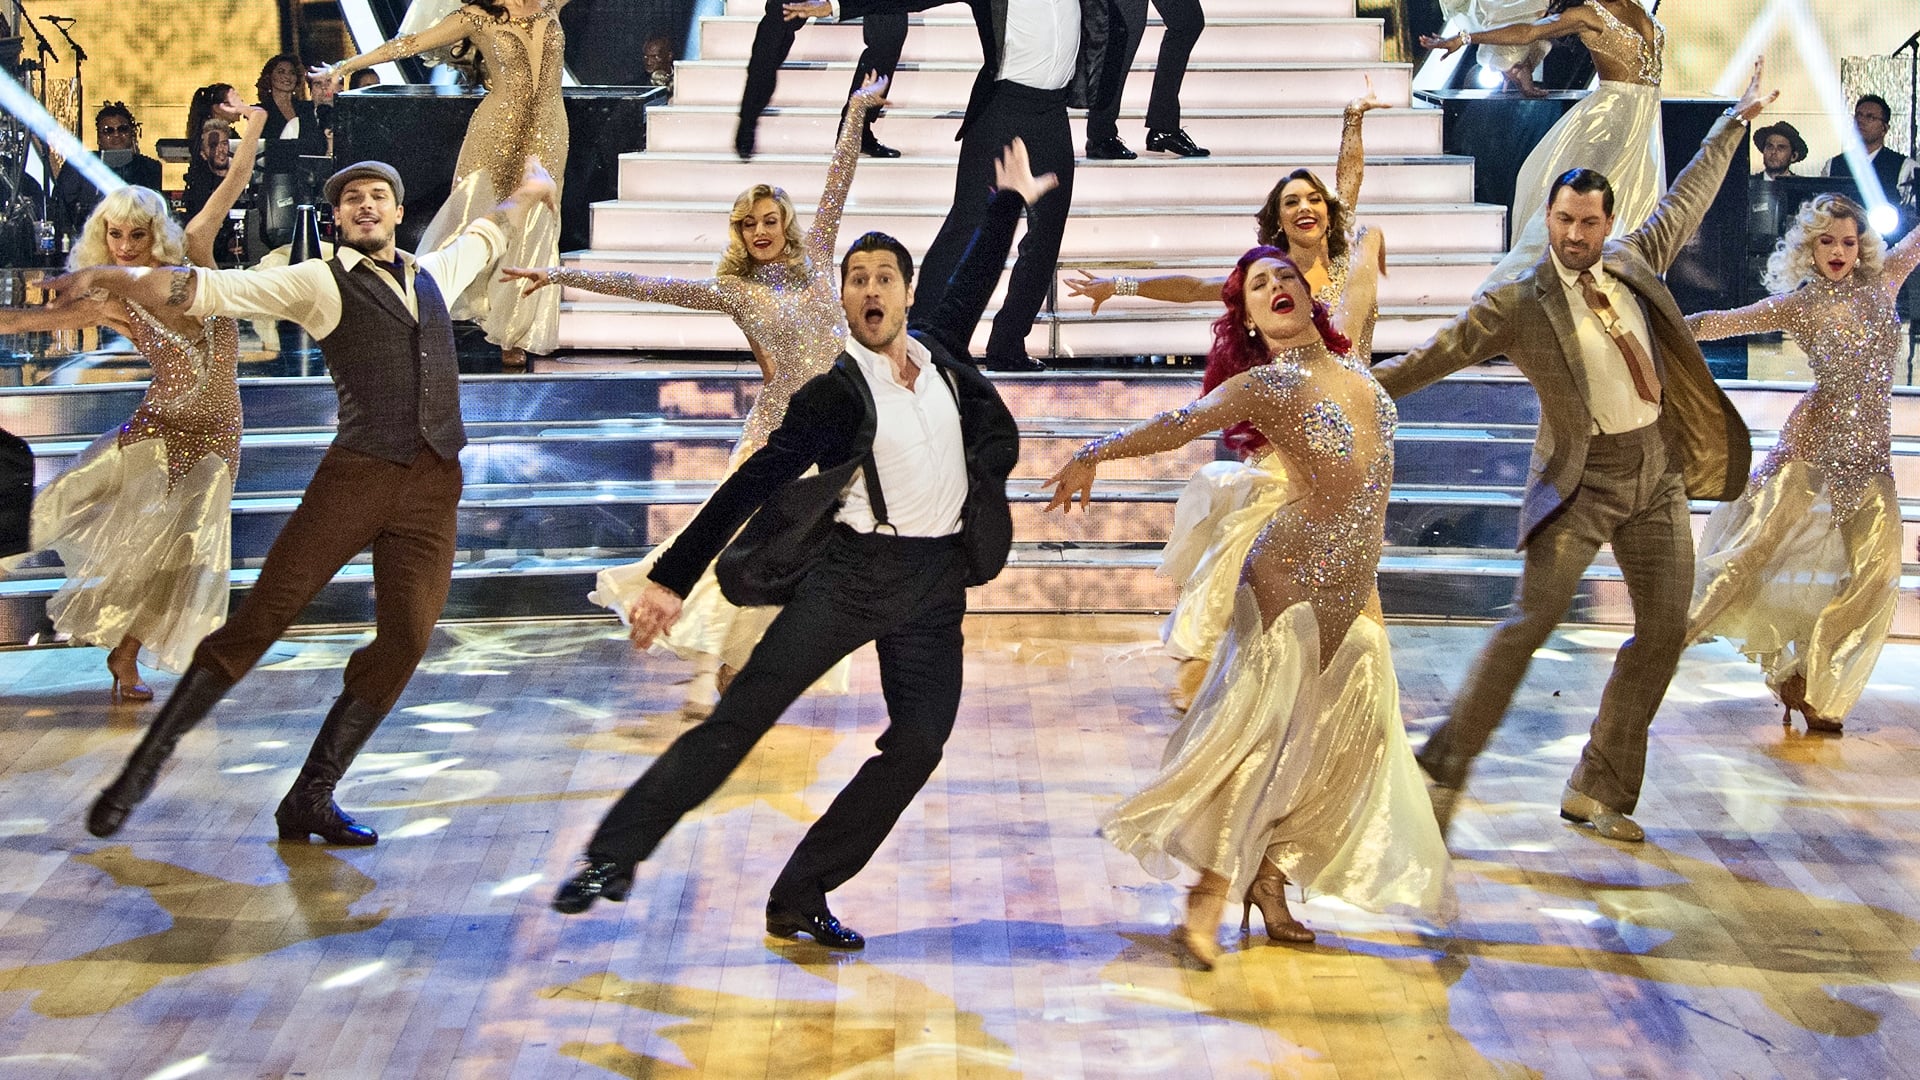 Dancing with the Stars Staffel 25 :Folge 7 